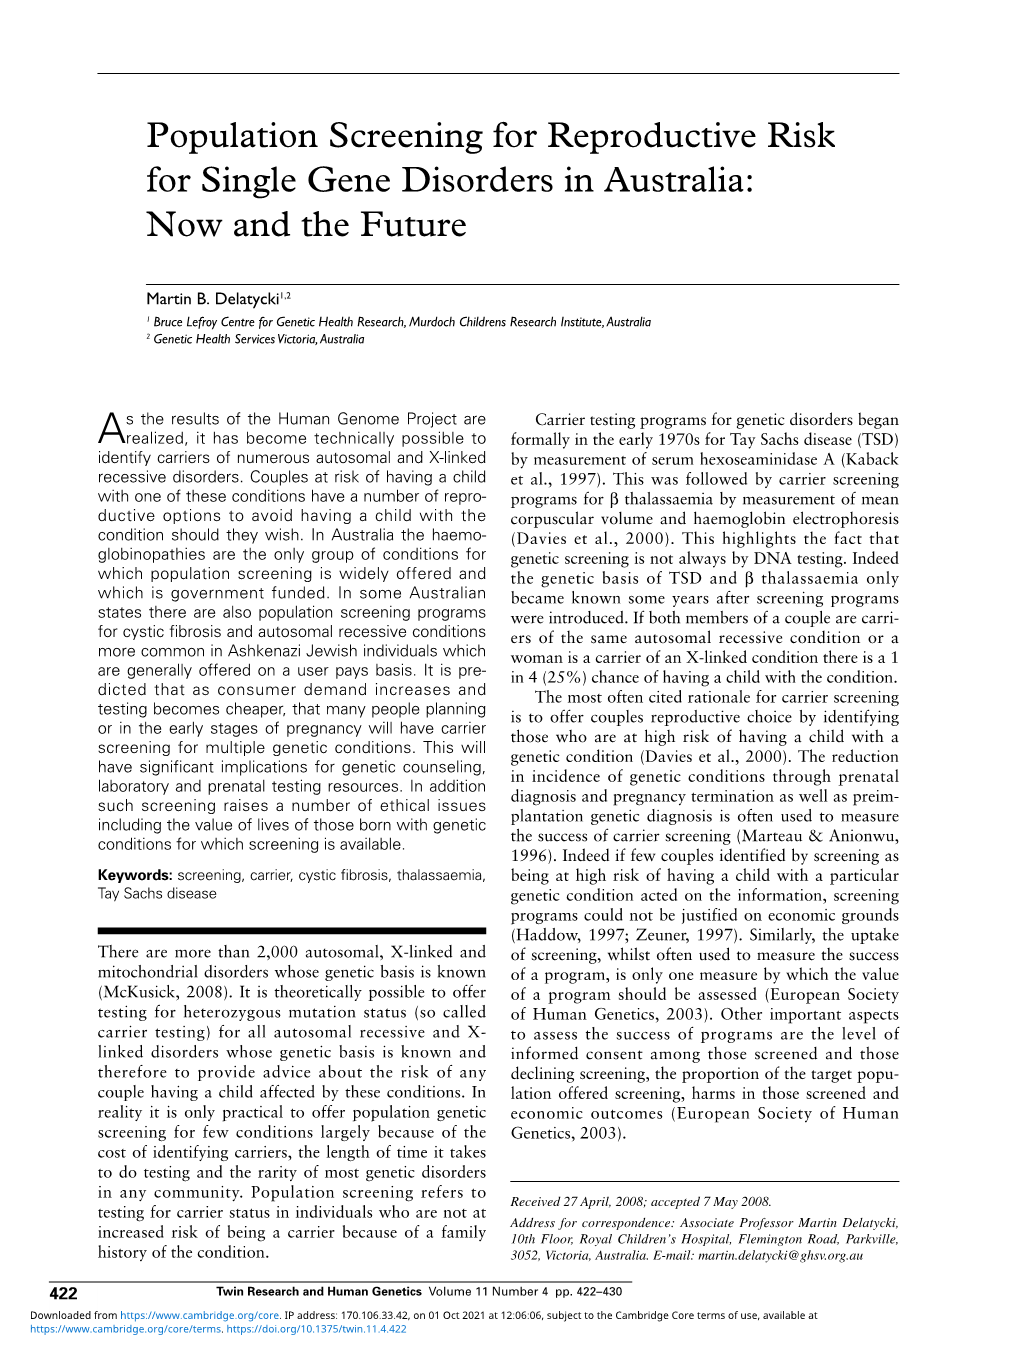 Population Screening for Reproductive Risk for Single Gene Disorders in Australia: Now and the Future